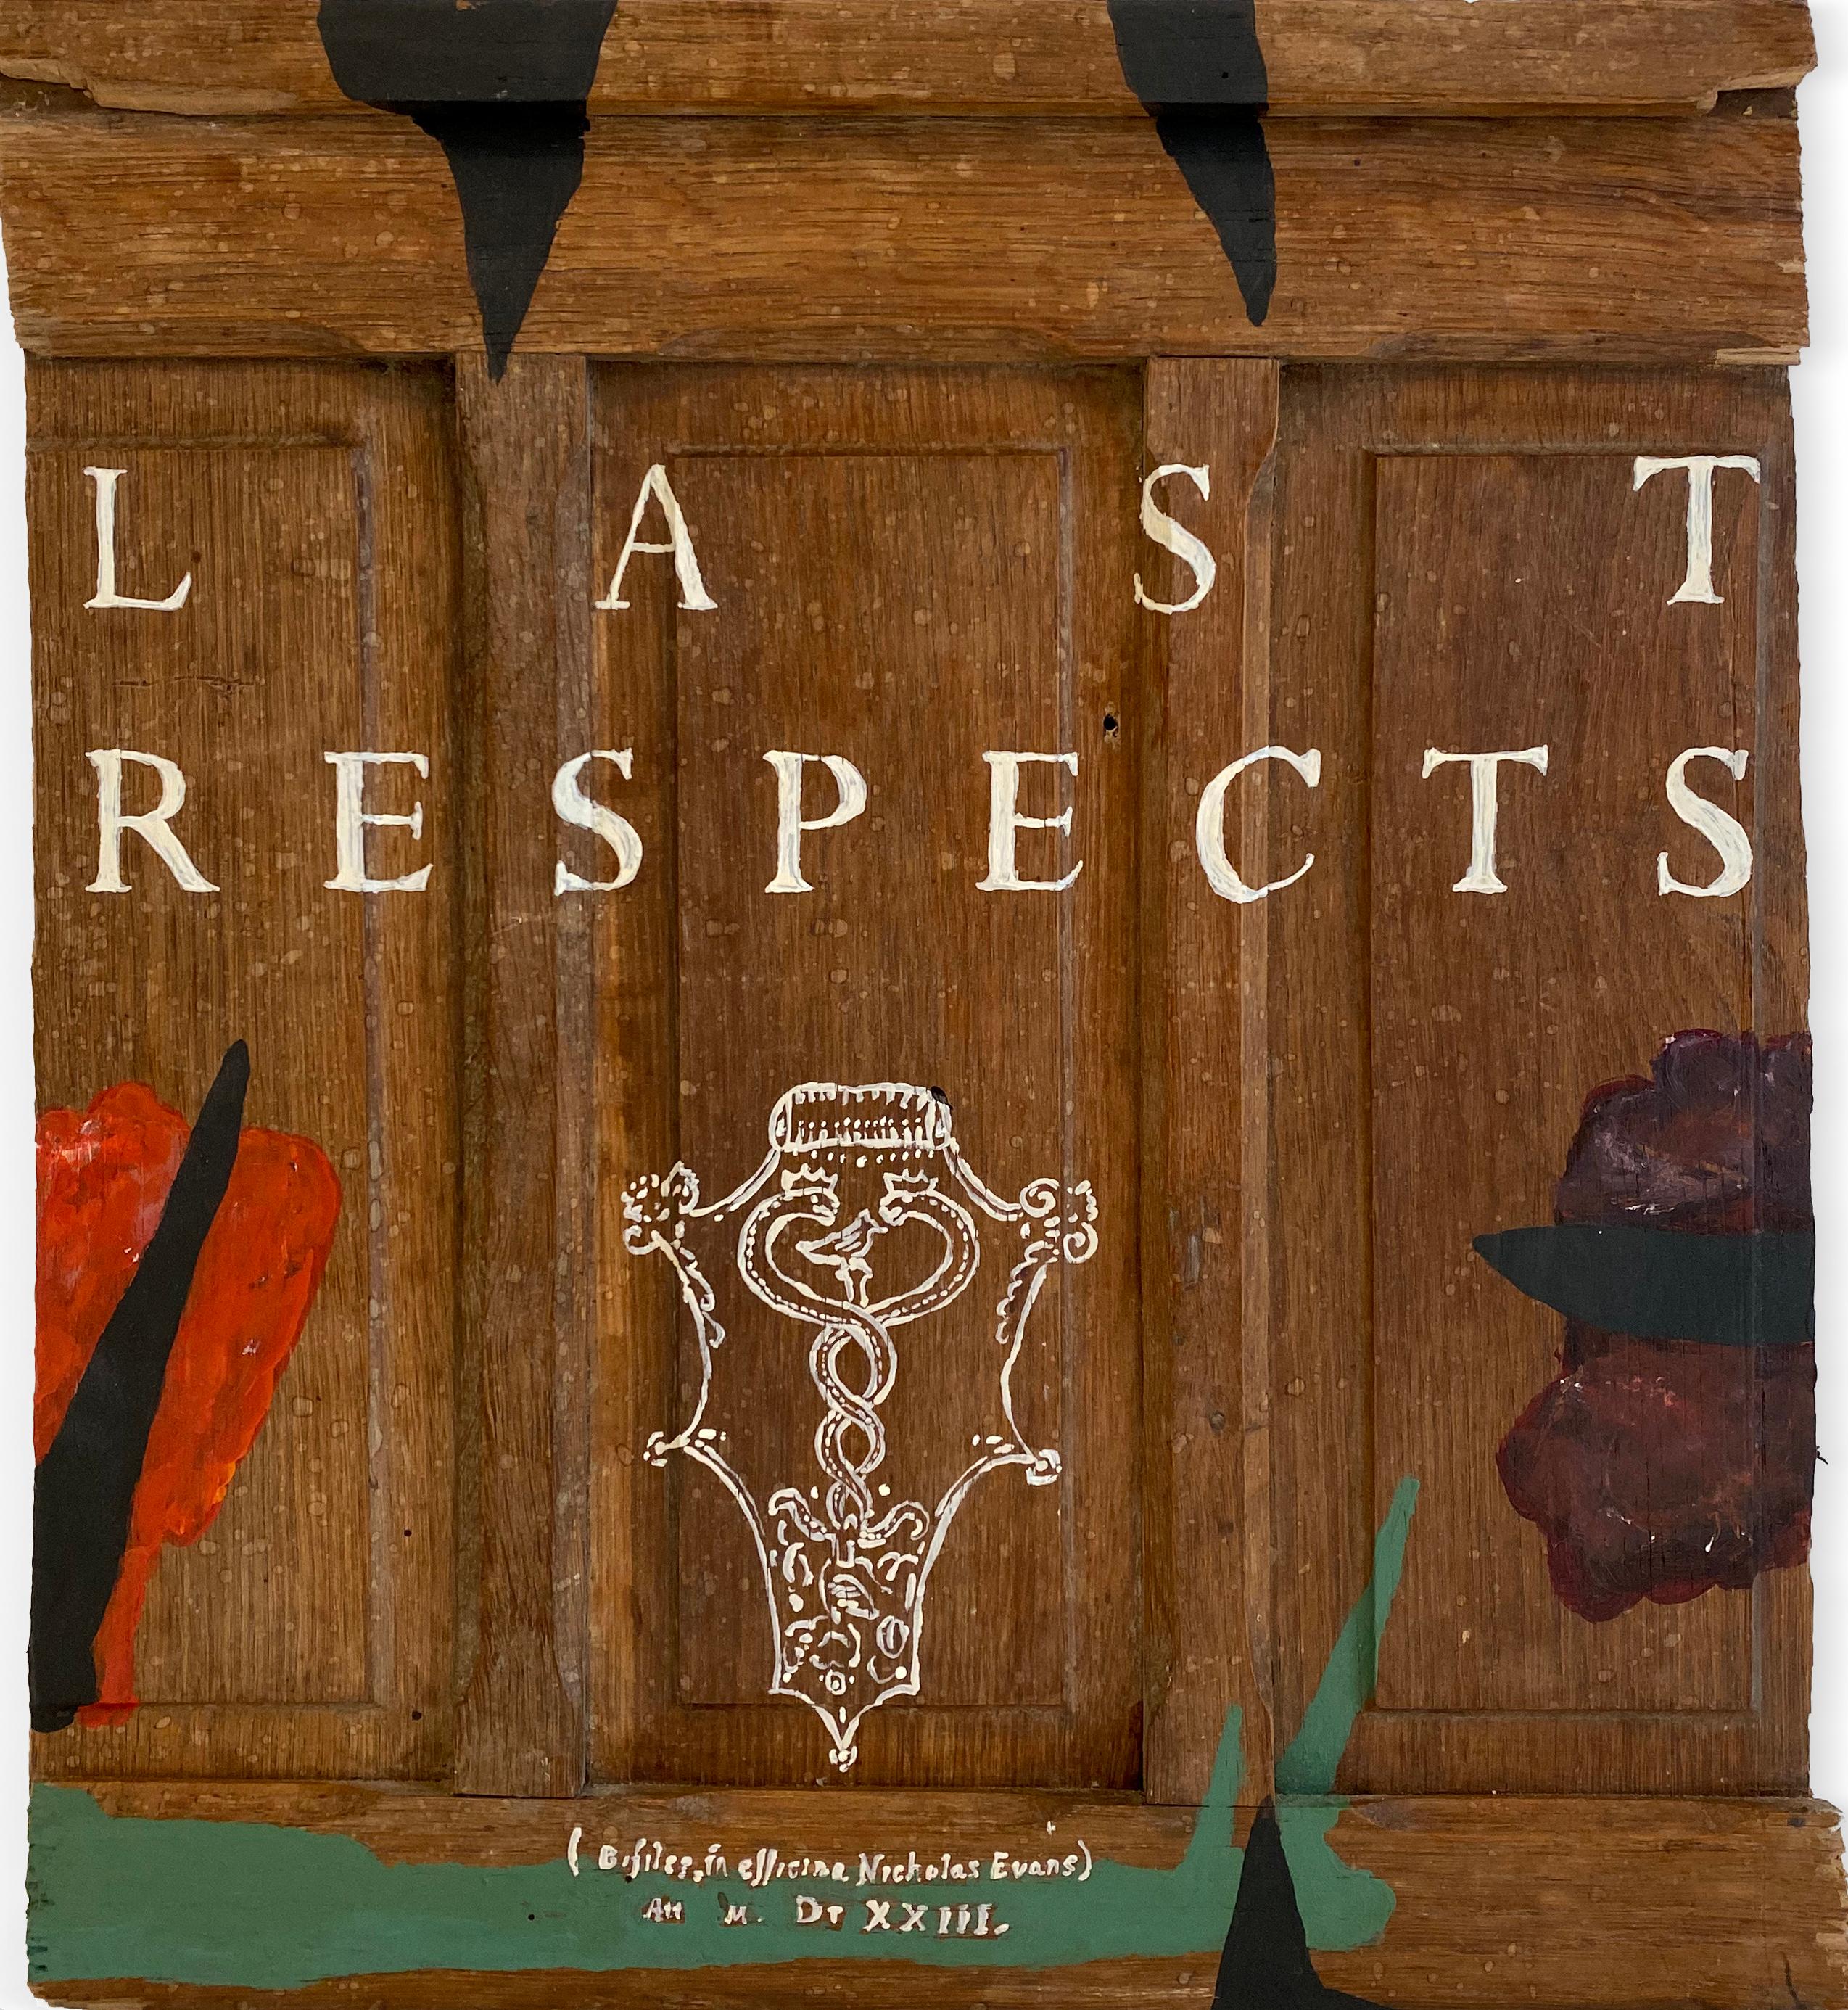 "Last Respects" (Abstract, Graphic, Text, Type, Sustainable, Antique Wood Door)